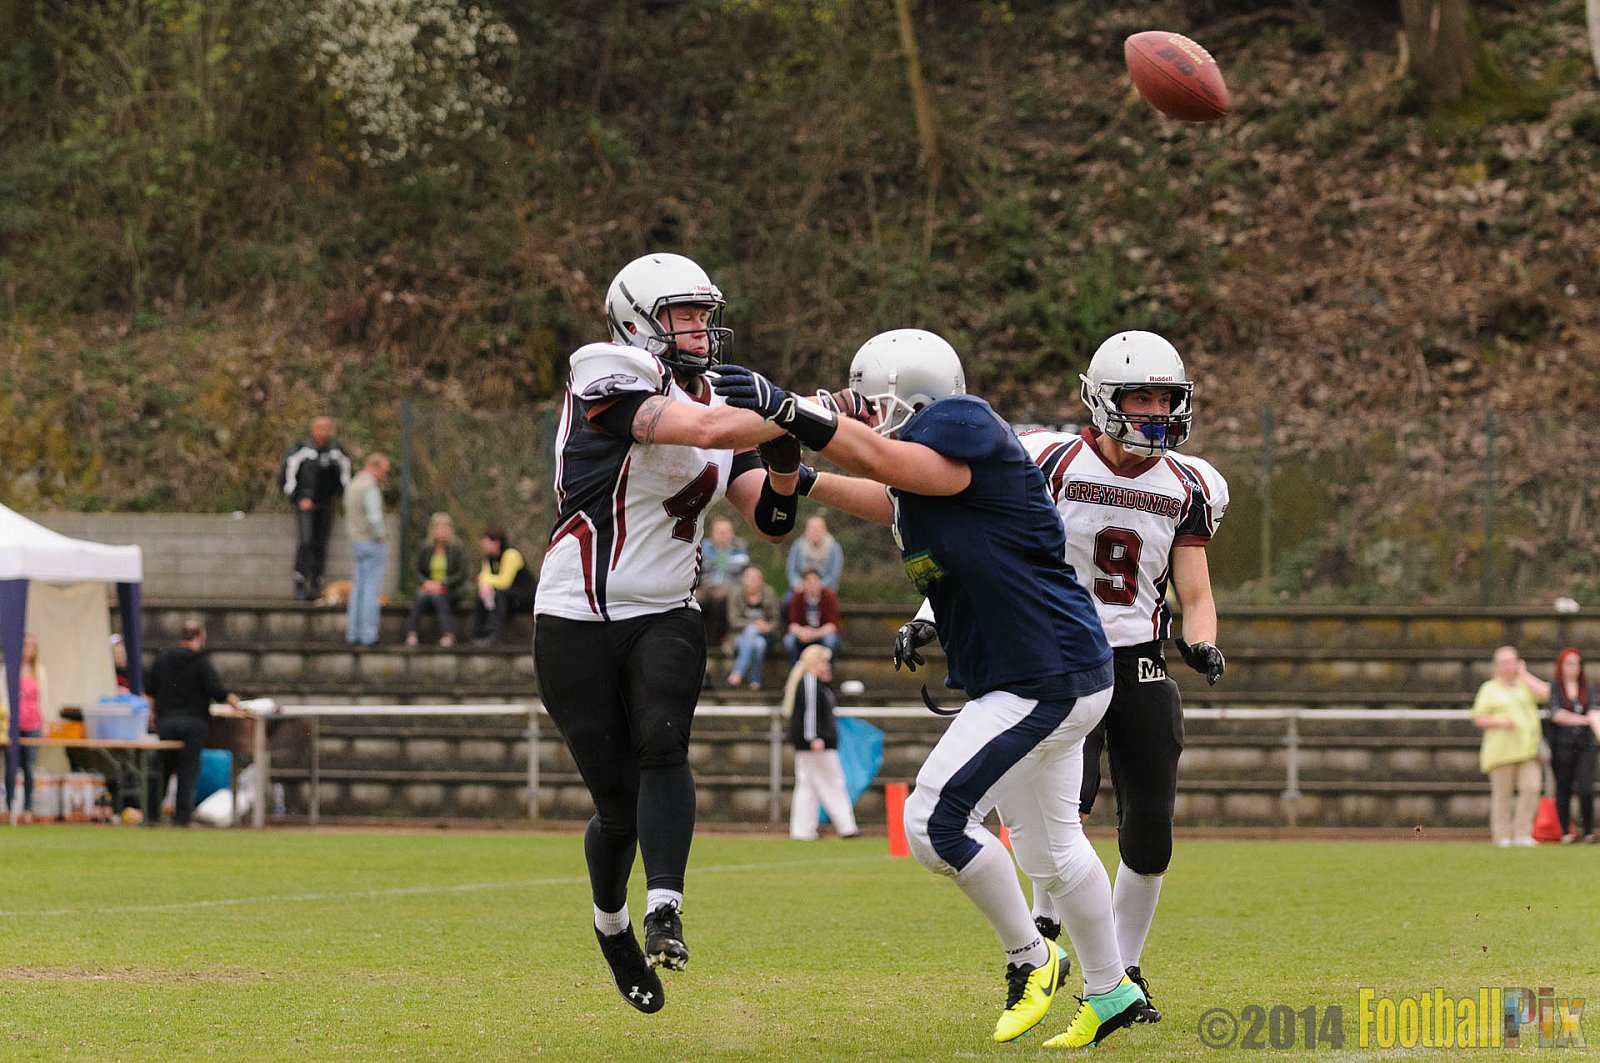 Wupperbowl 2014 - 30.03.2014 Off-Season Game: "Wupper Bowl 2014" 